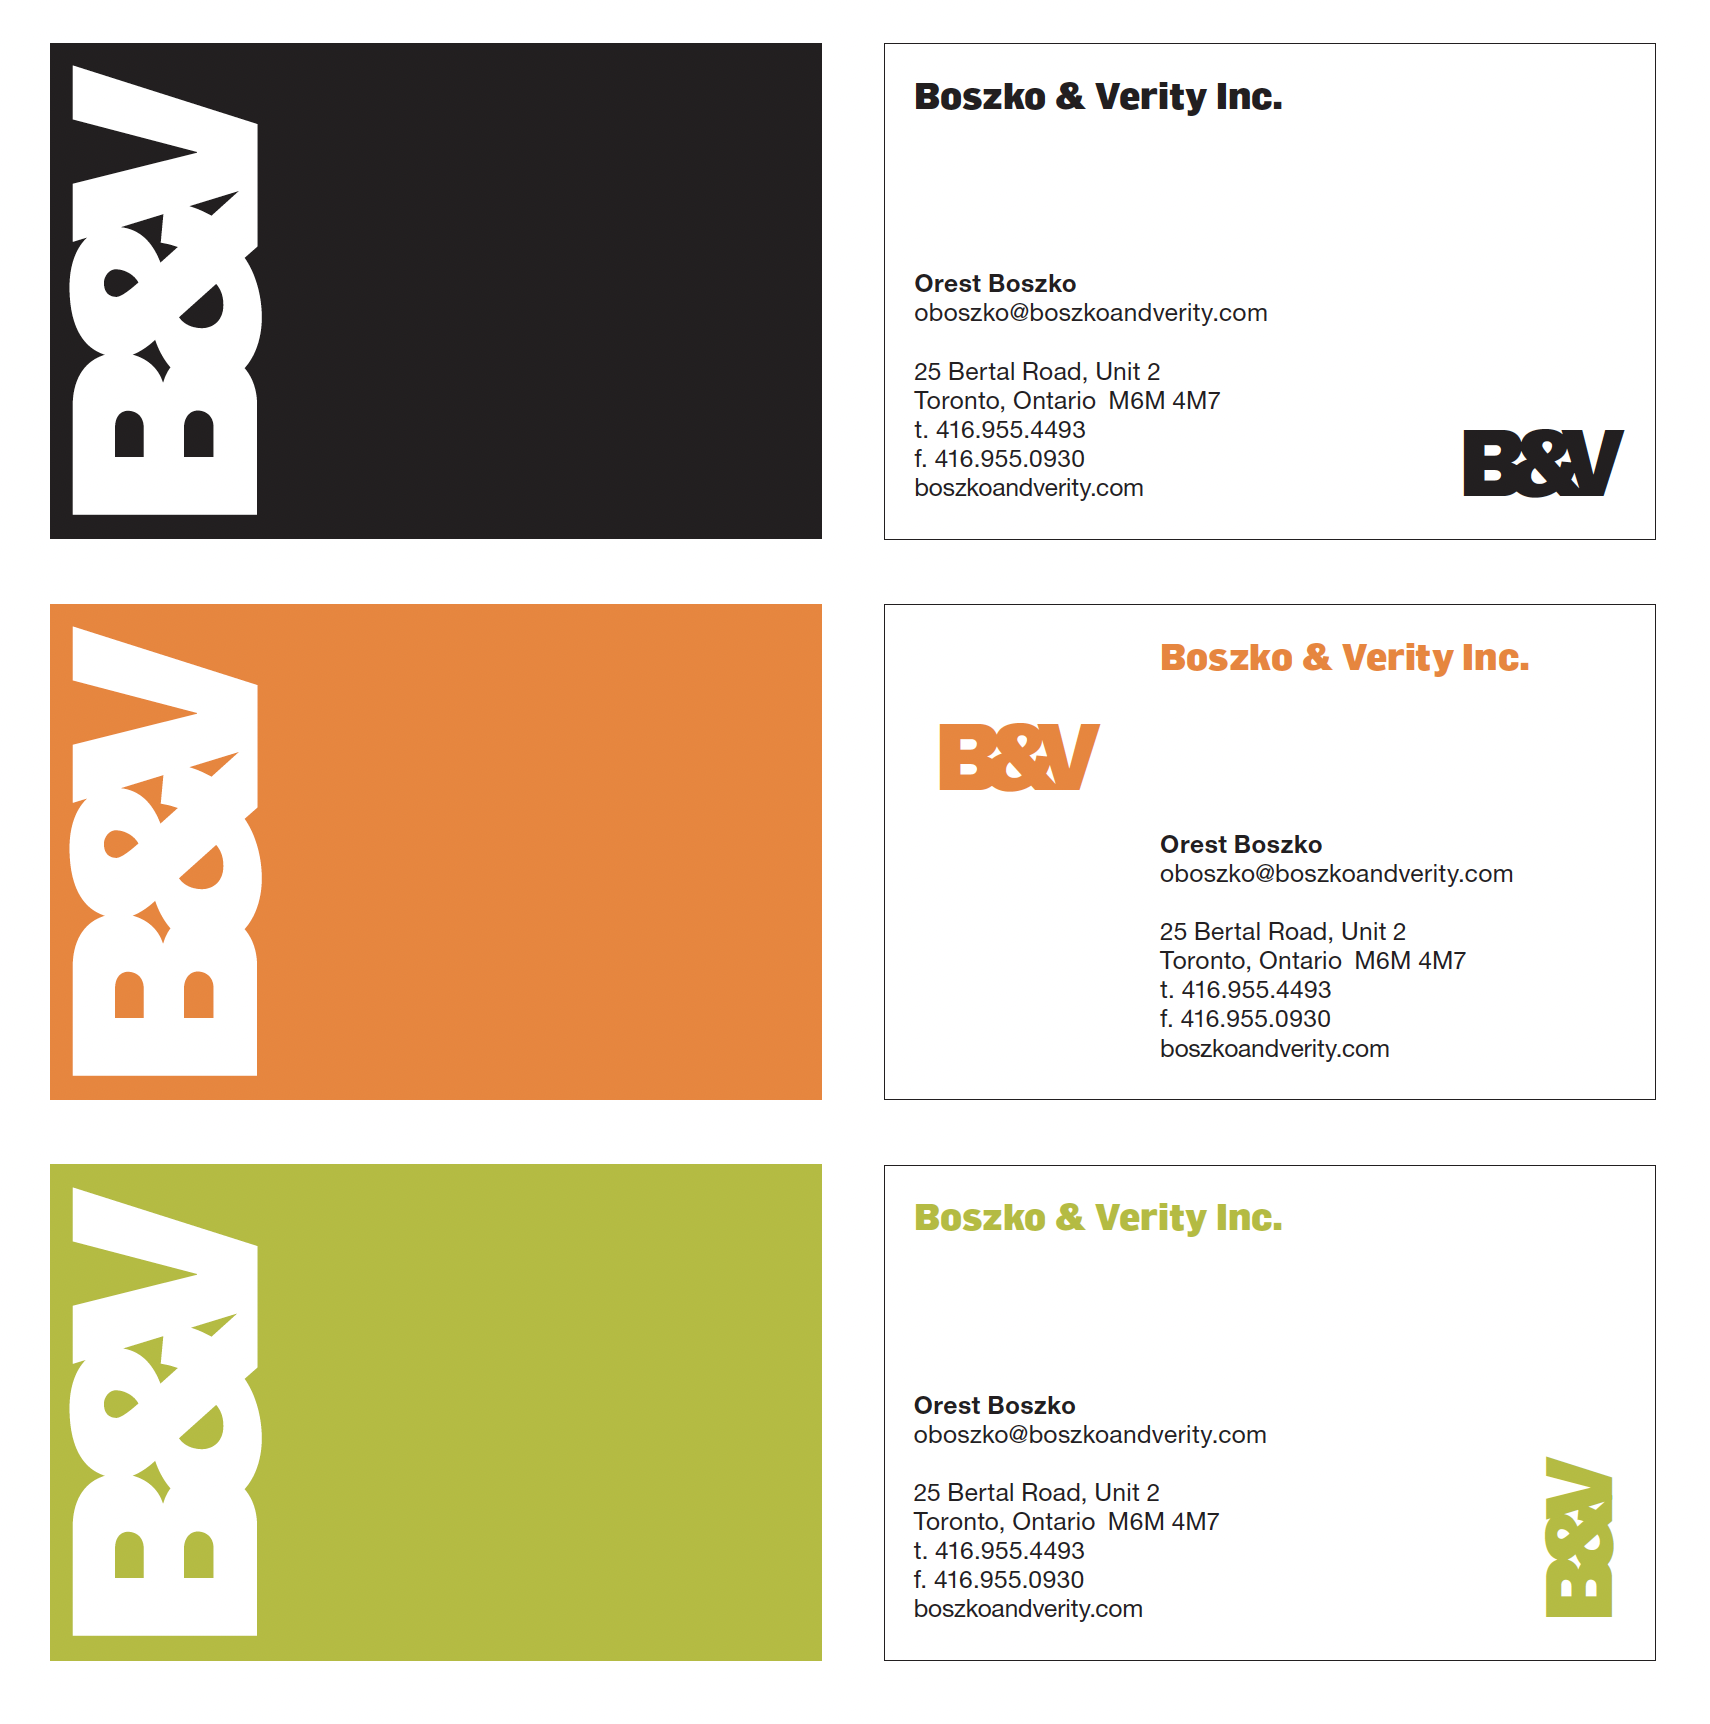 BV-business-cards-front-and-back